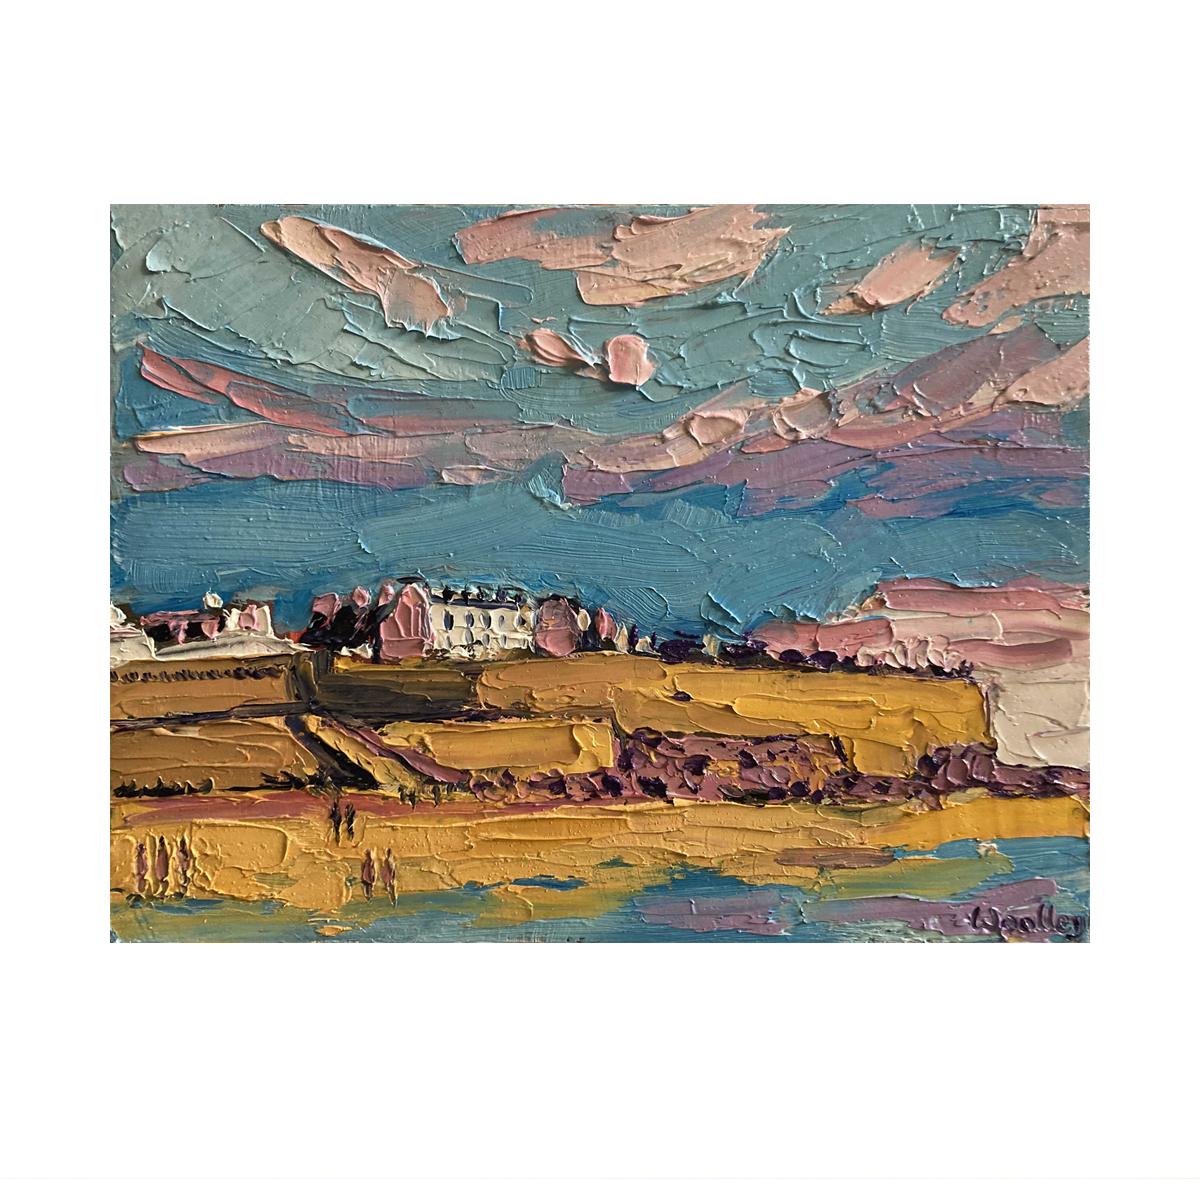 Saint Malo Sky is an Original Painting by Eleanor Woolley. Preliminary sketches we made in Saint Malo to inspire this colourful depiction of the Intra Muros. The setting sun reflect pink in the clouds, and the town and beach are a glowing yellow.